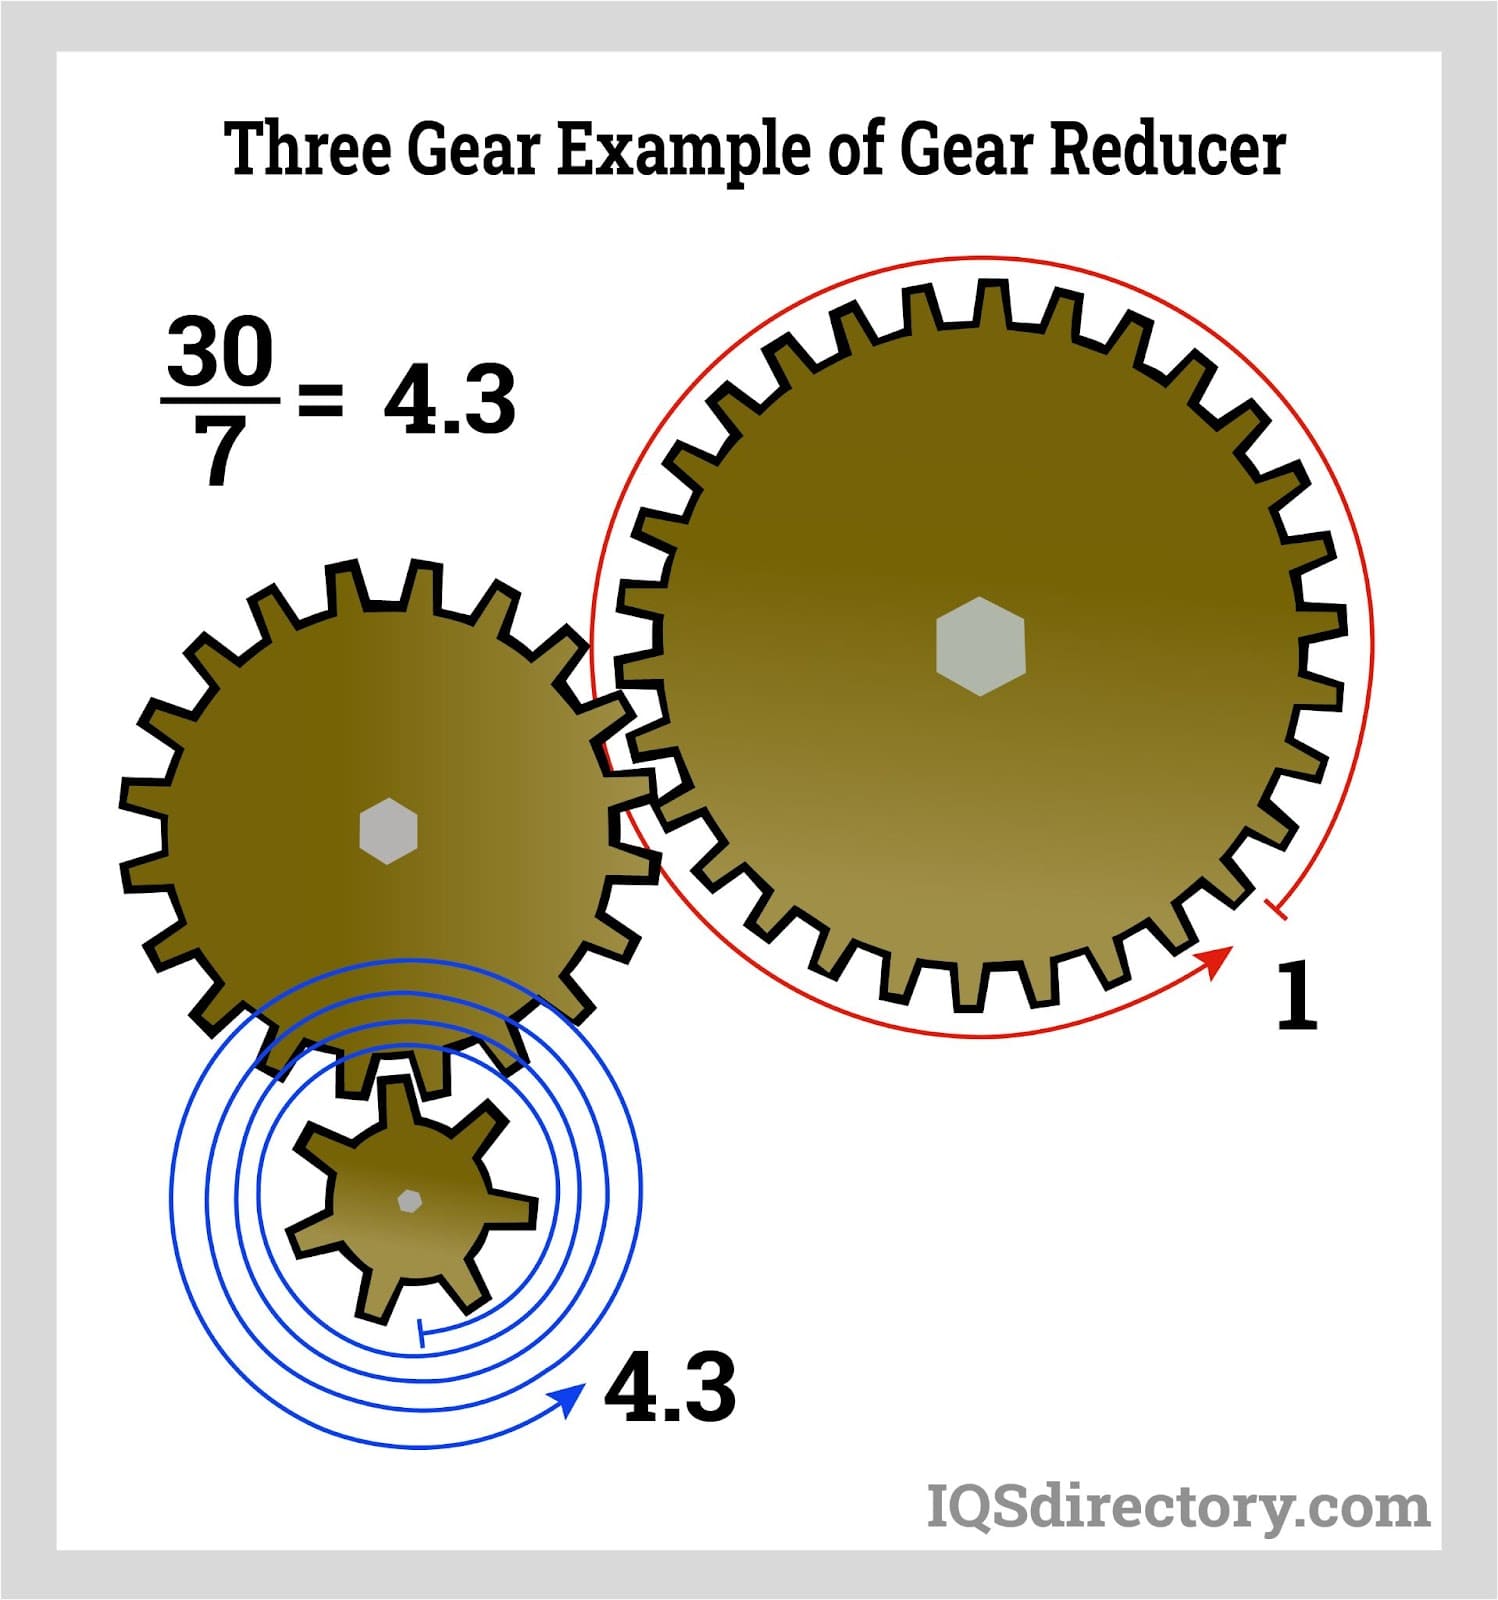 Compound Gear Train: Meaning, Application, Working and Examples